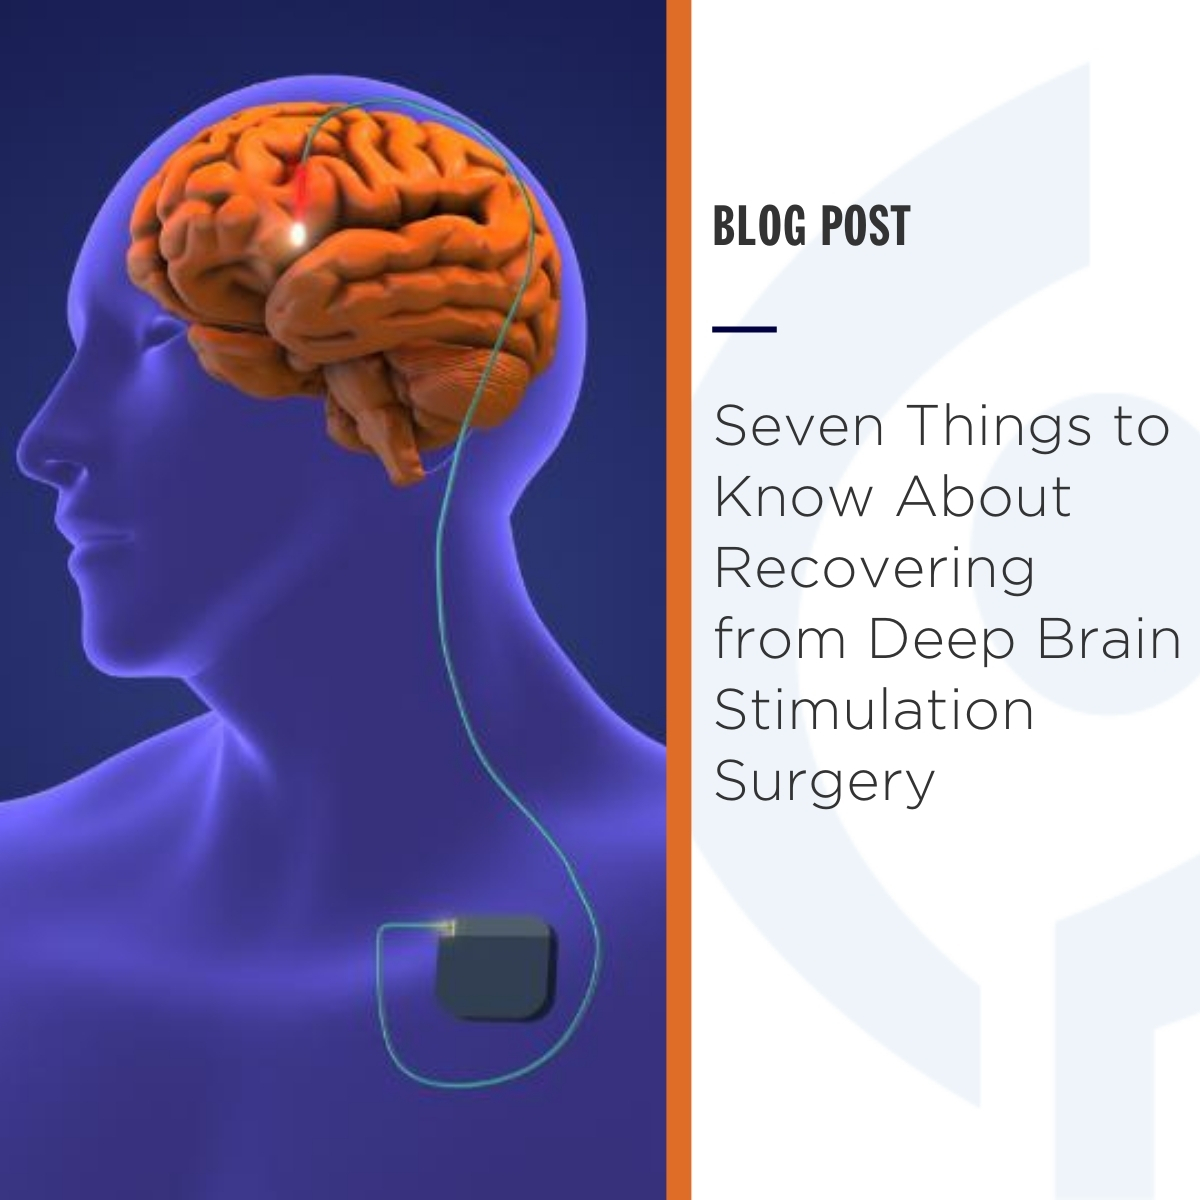 Getting started with deep brain stimulation (#DBS) involves multiple steps, and the full process almost always involves several #surgical procedures. Read the blog for seven other things to know about #recovery from DBS #surgery: bit.ly/49rQAUT